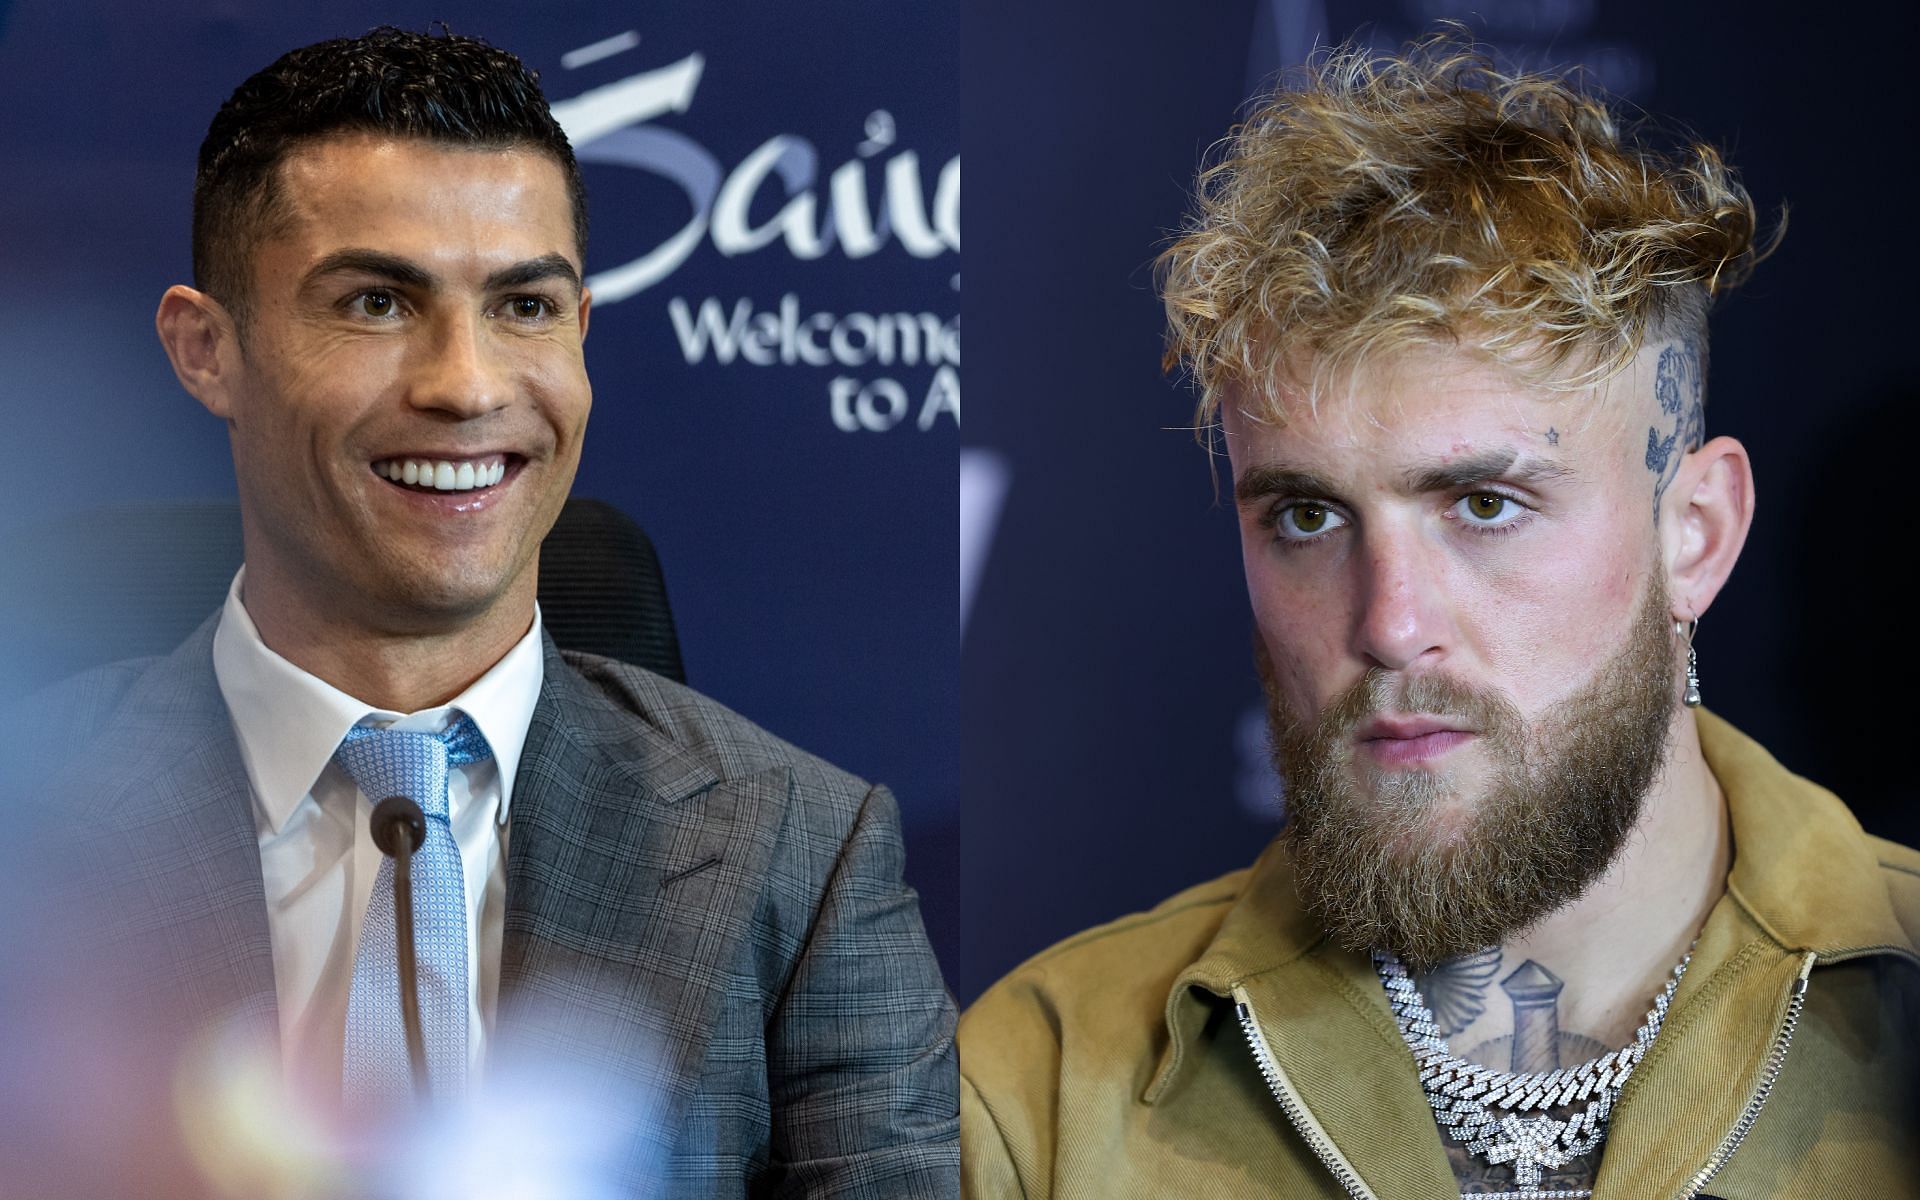 Cristiano Ronaldo (left) and Jake Paul (right) [Image Credits: Getty Images] 